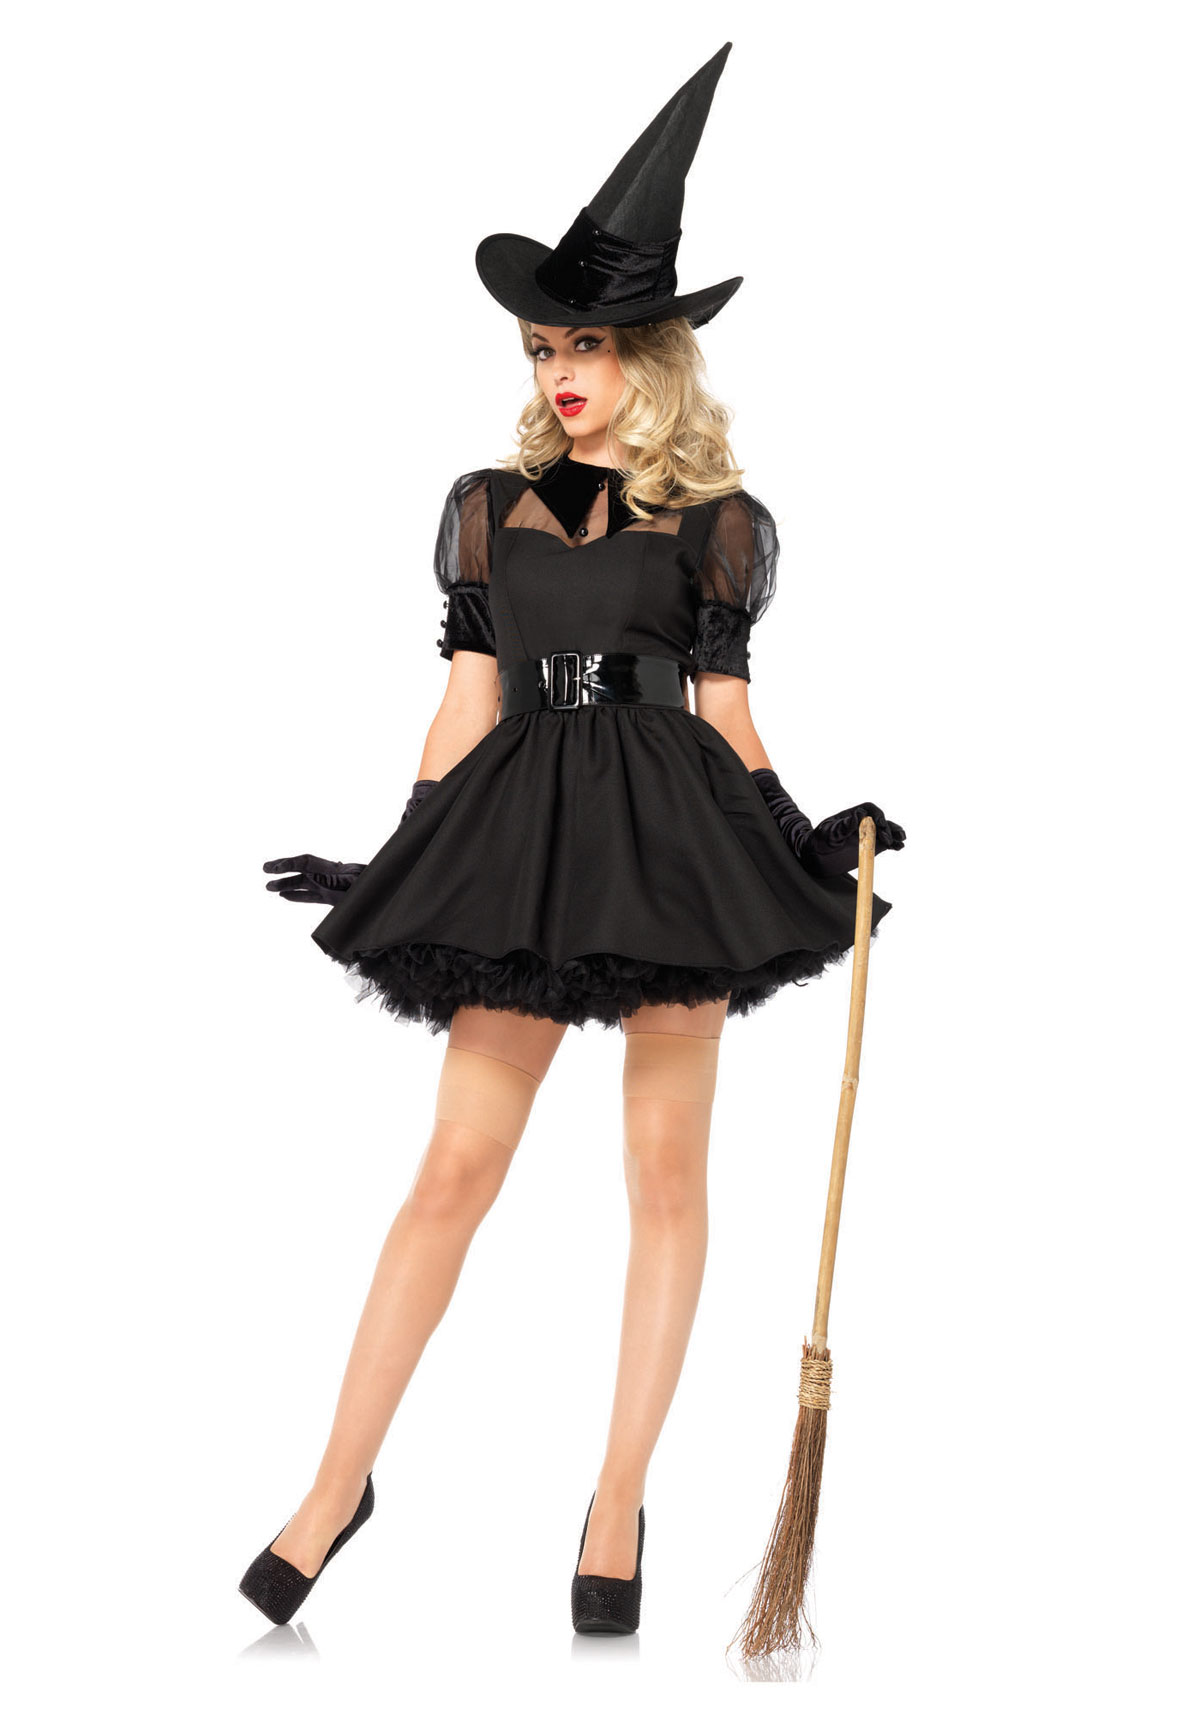 Leg Avenue 3Pc. Bewitching Witch, Dress With Organza, Belt, Hat - Black